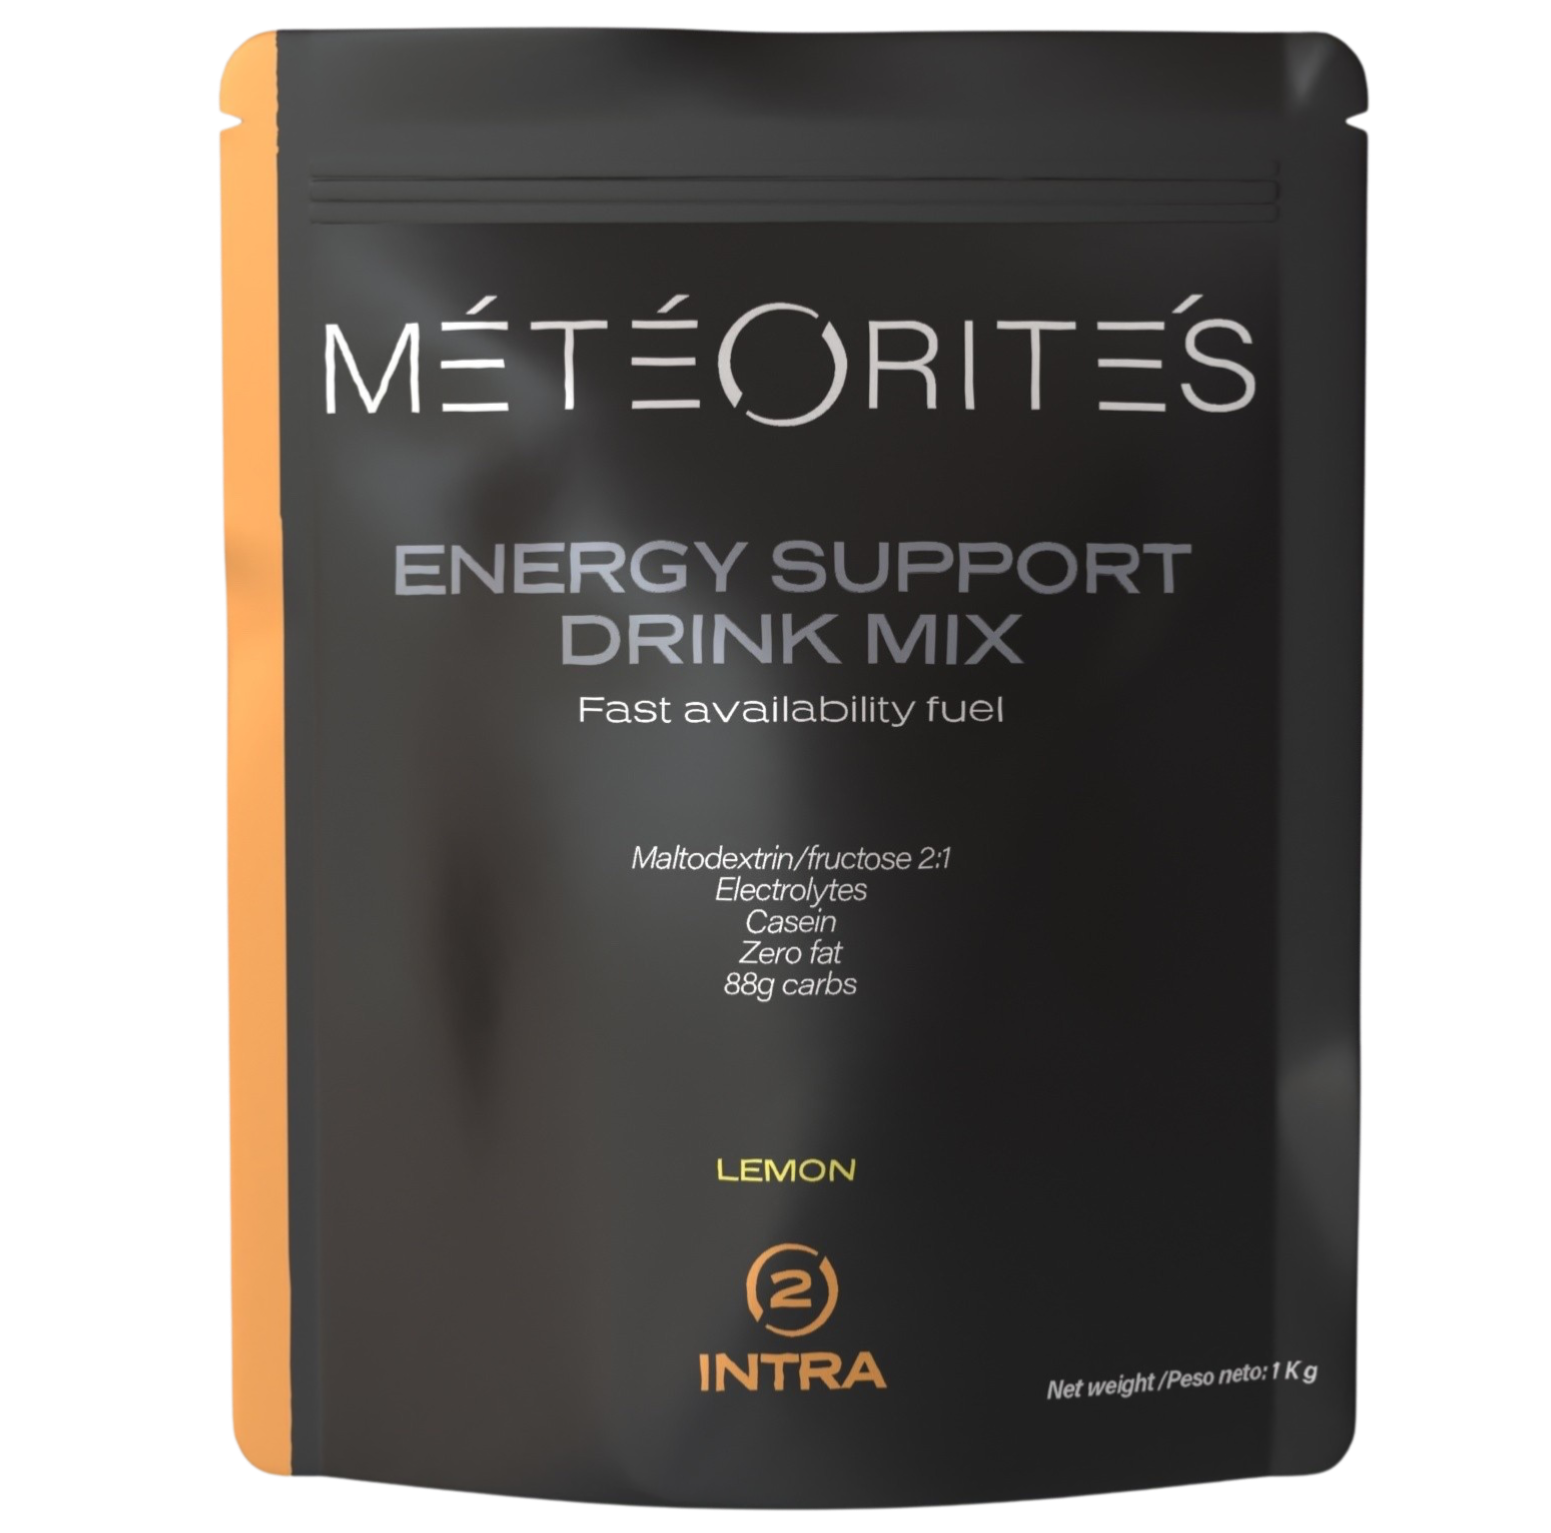 ENERGY SUPPORT DRINK MIX